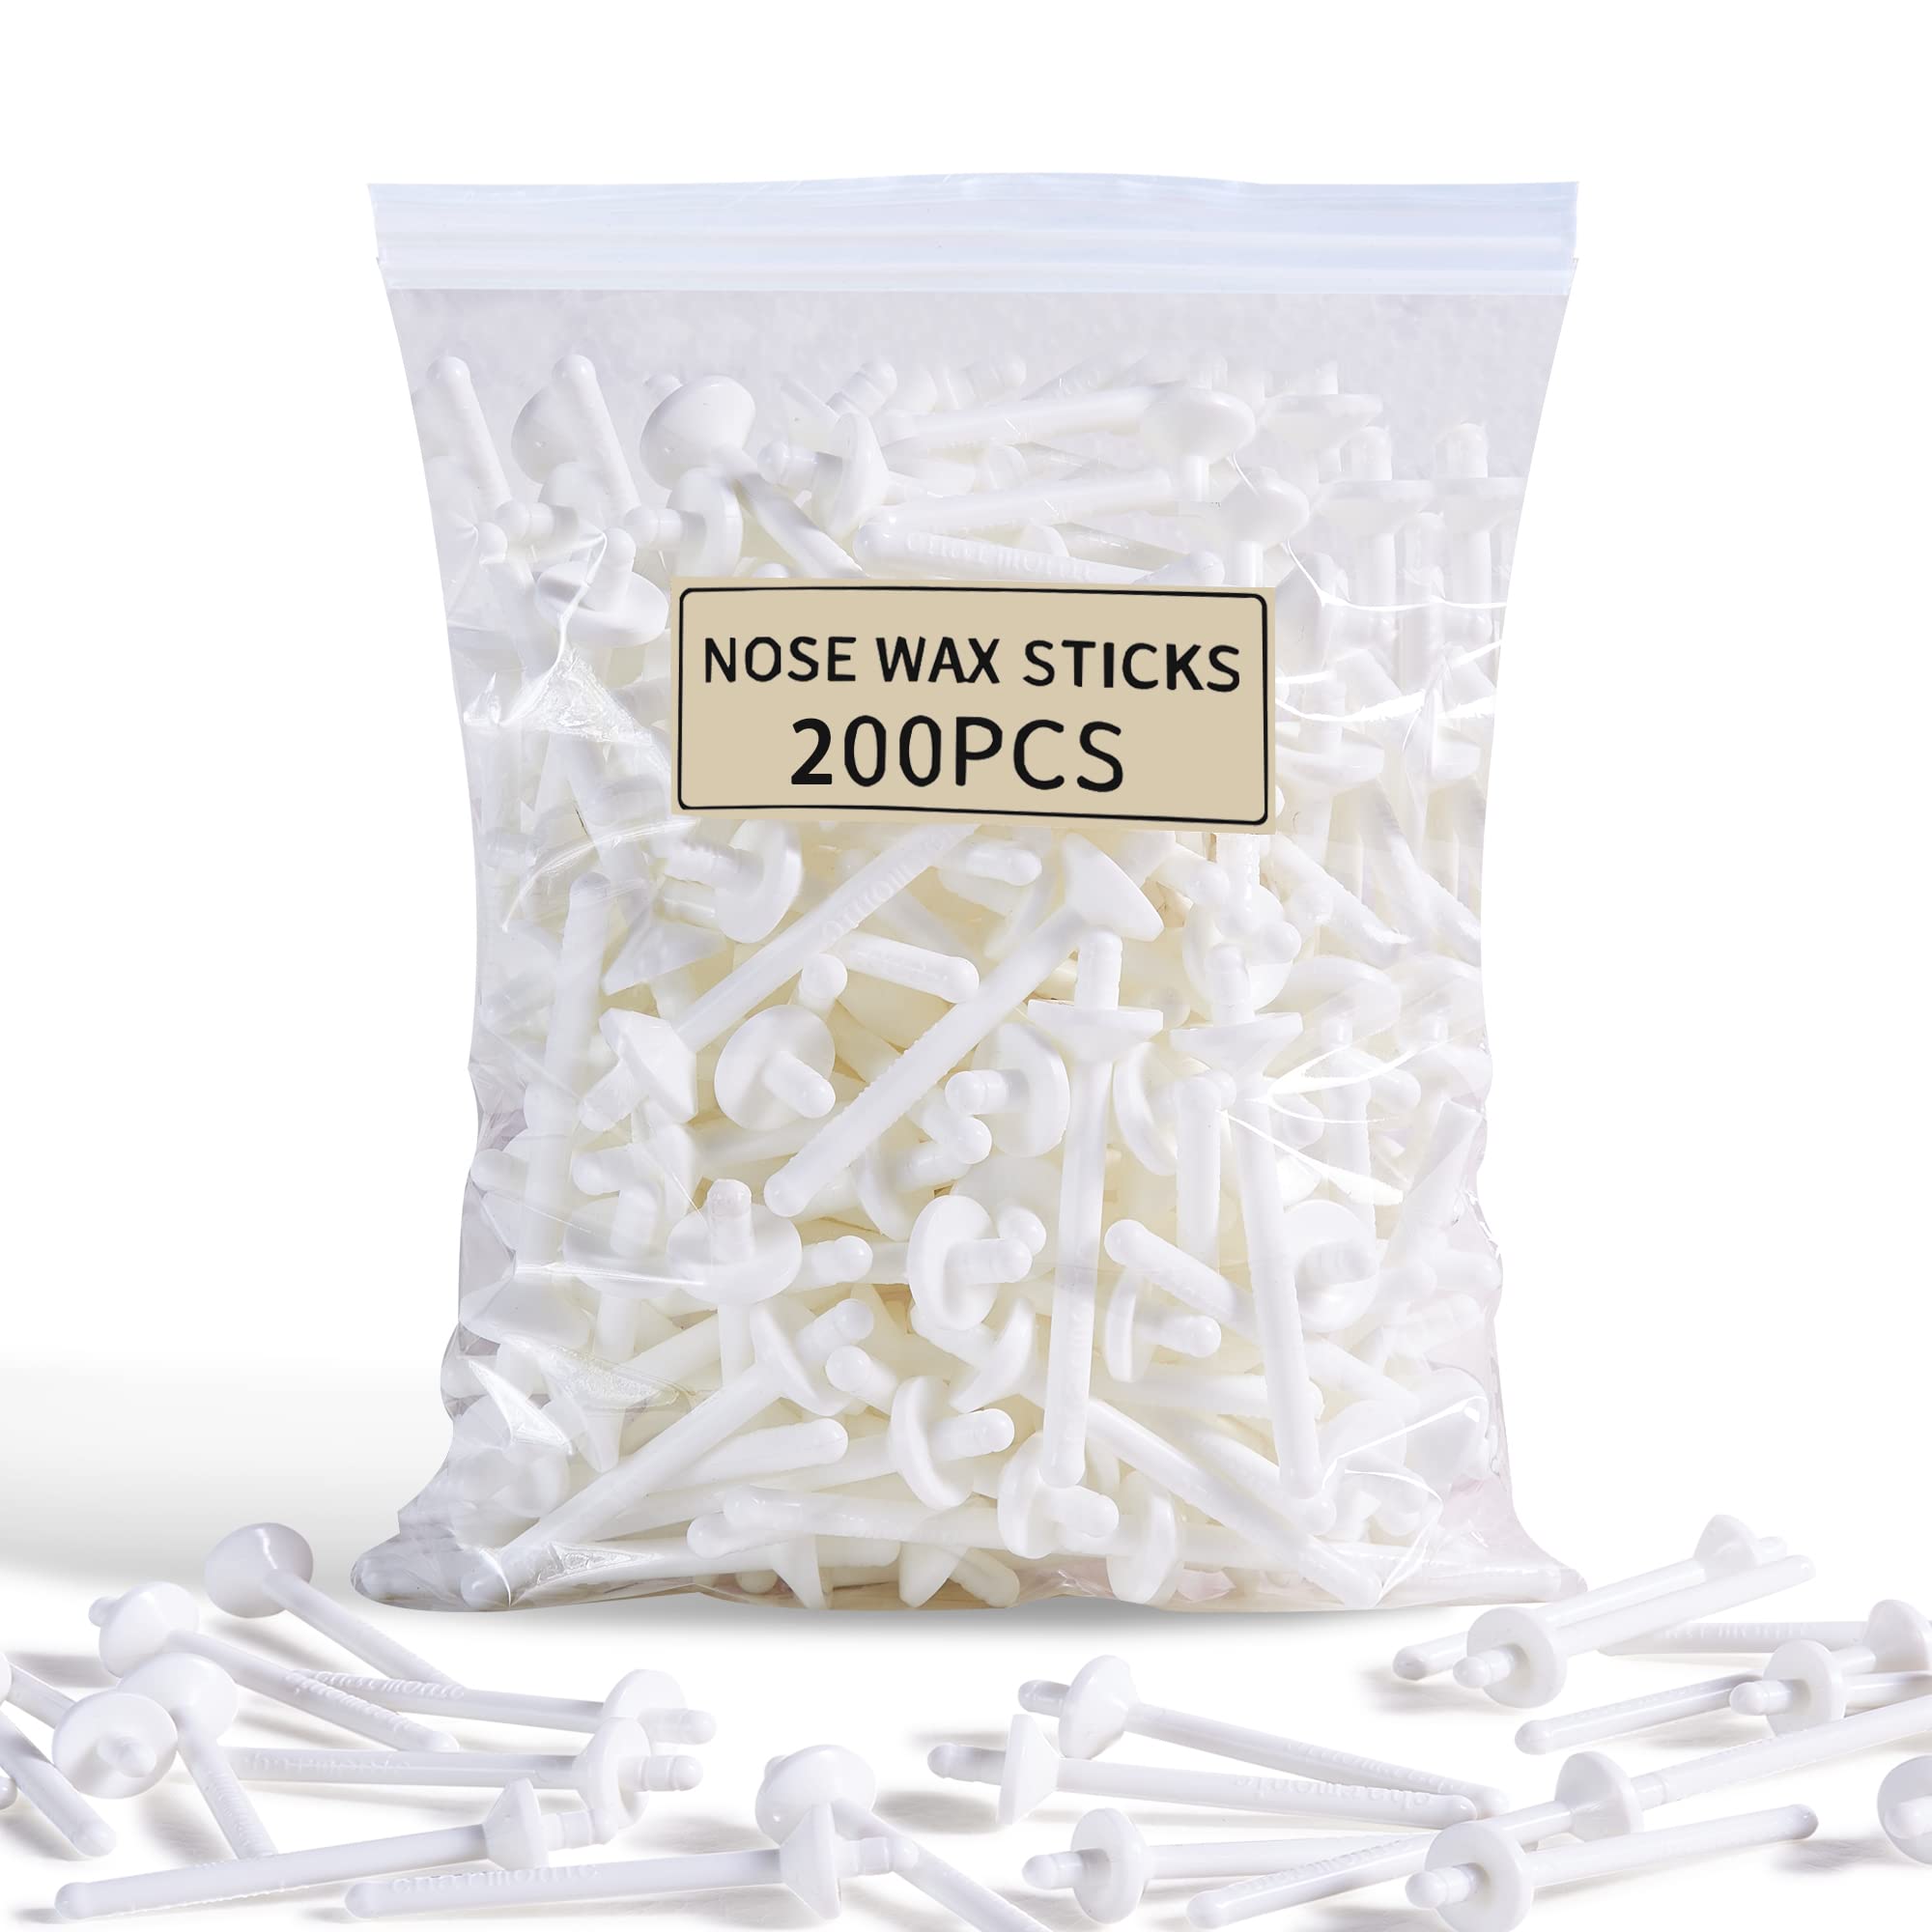 200 Pcs Wax Sticks, Nose Wax Kit Accessories, Waxing Sticks for Nose Hair  Remover, Wax Applicator Sticks for Nostril Nasal Cleaning Ear Face Eyebrows Hair  Removal for Men Women WK-04